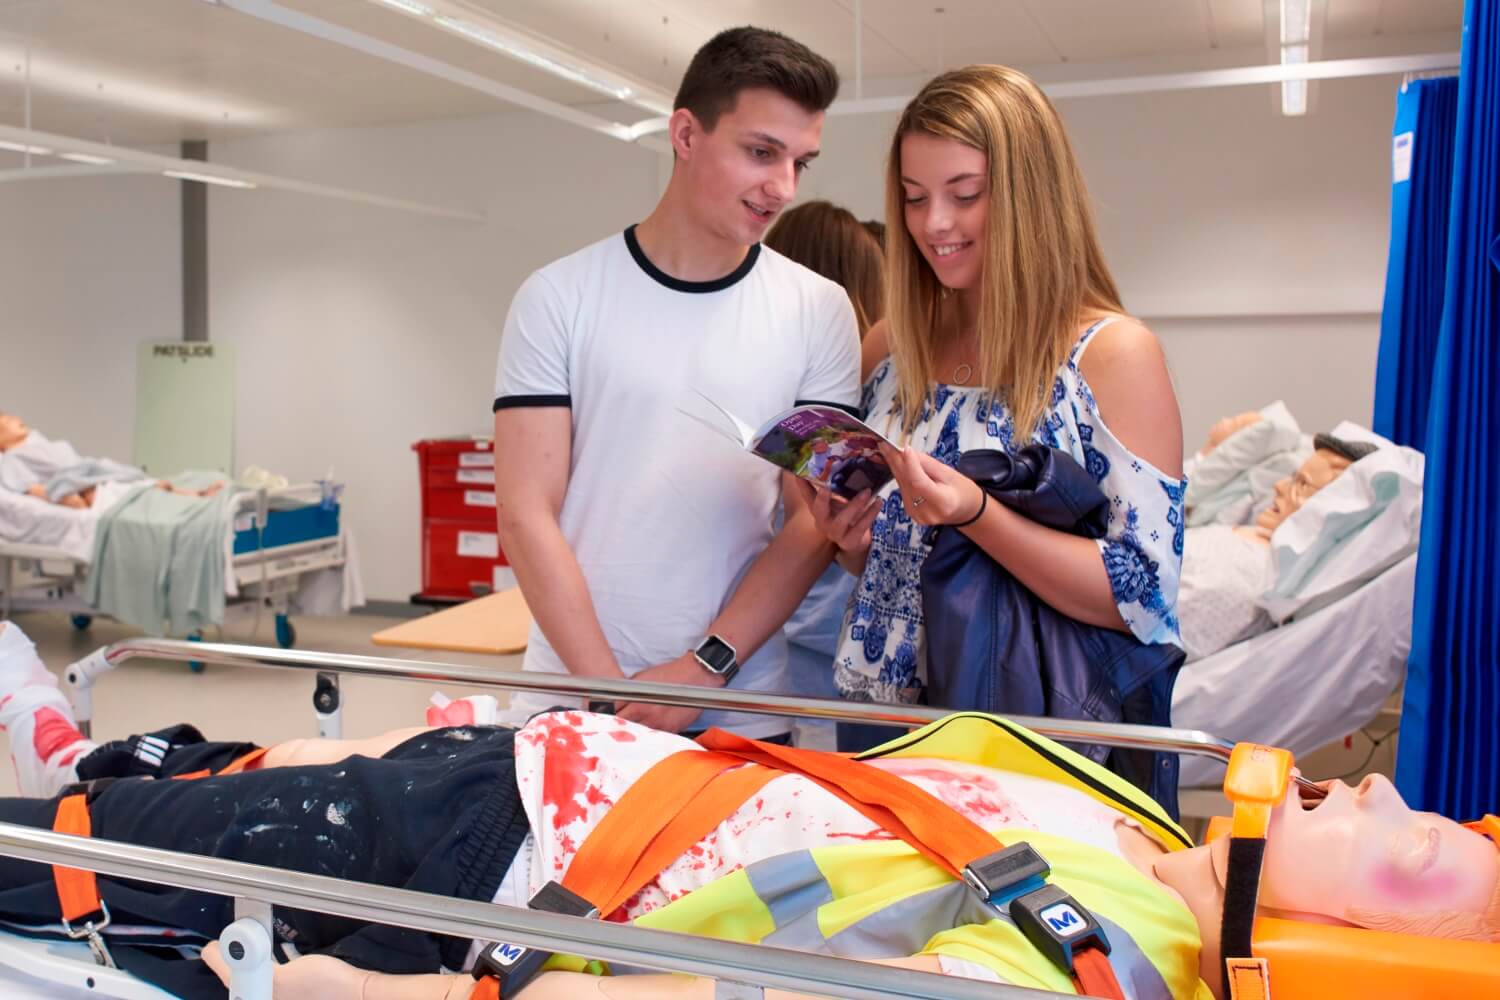 Prospective students view the clinical skills facilities in the Faculty of Health, Social Care and Medicine during an open event.